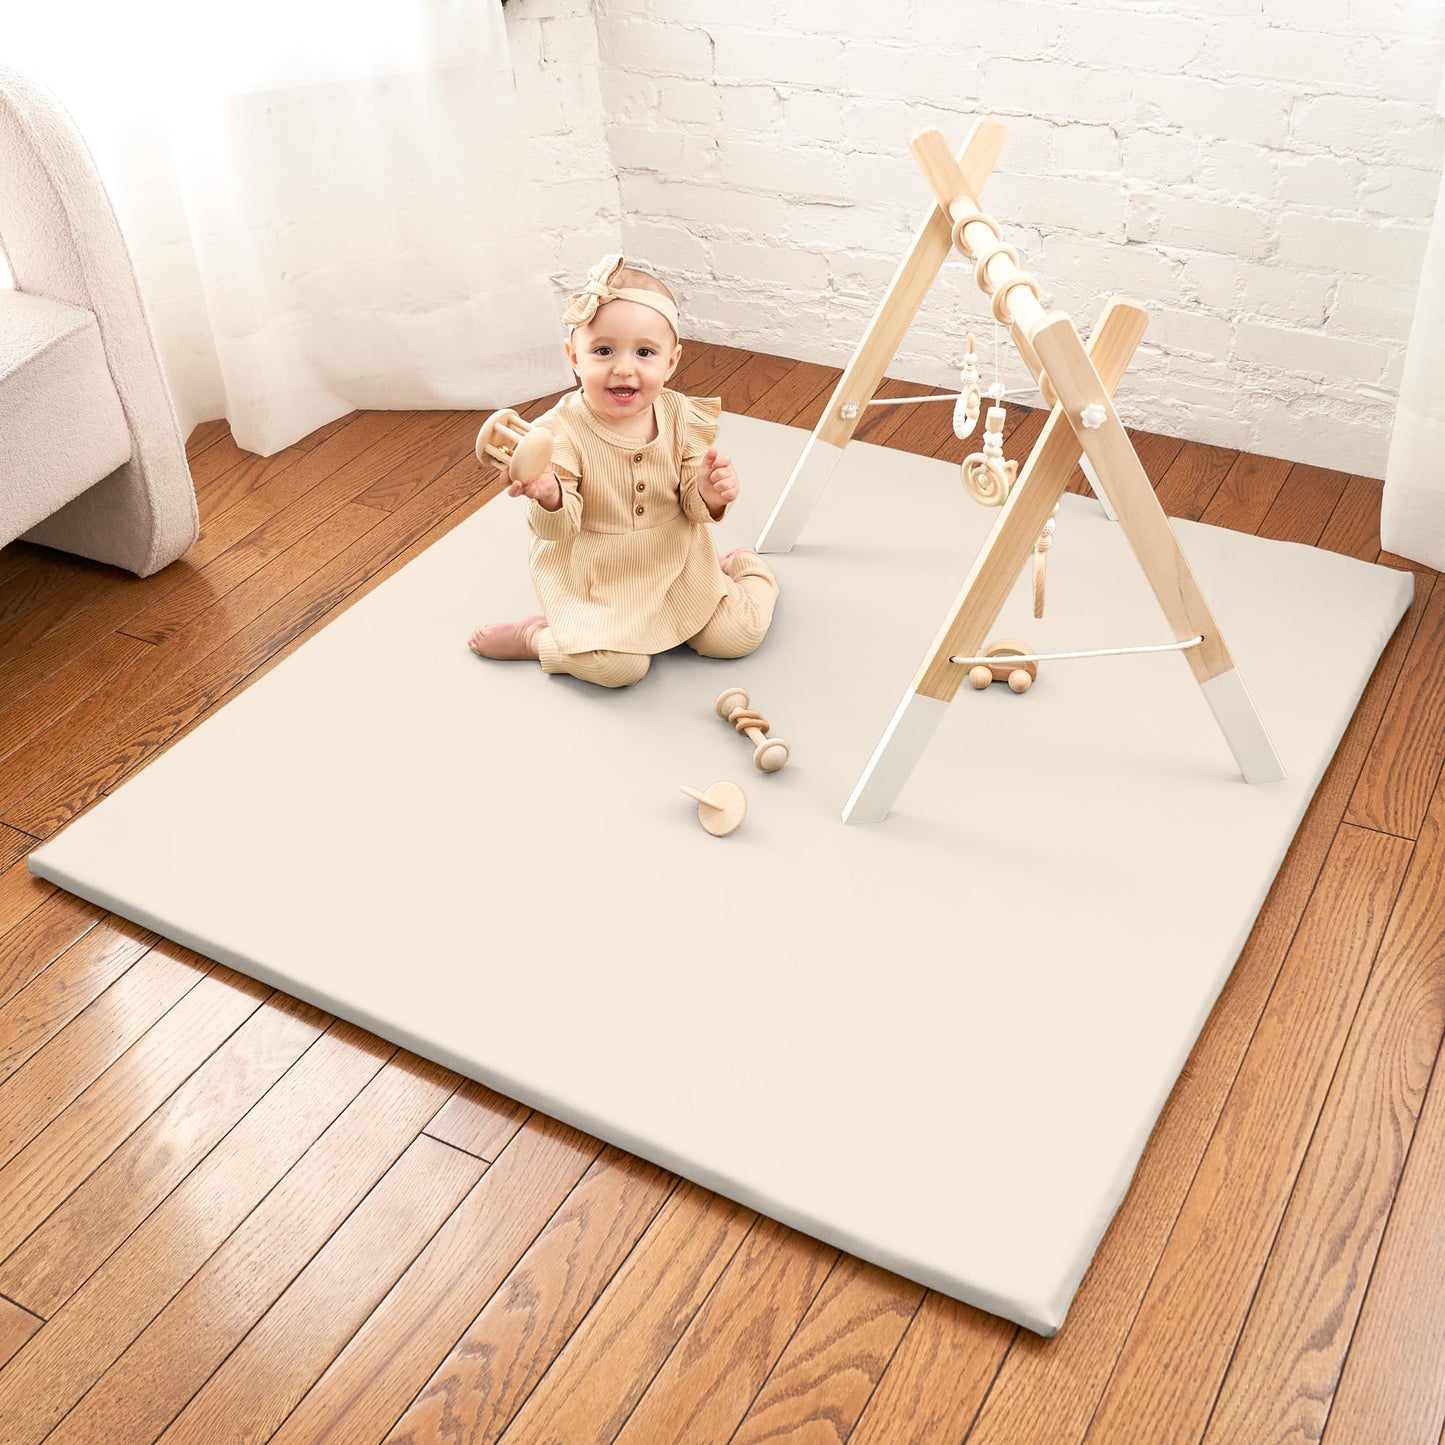 Stylish Padded Baby Play Mat for Your Boy or Girl - Extra Thick & Super Soft Vegan Leather Floor Mat Creates A Safe Play Area for Little Ones - A Beautiful Playmat That Fits Nicely Into Any Playroom